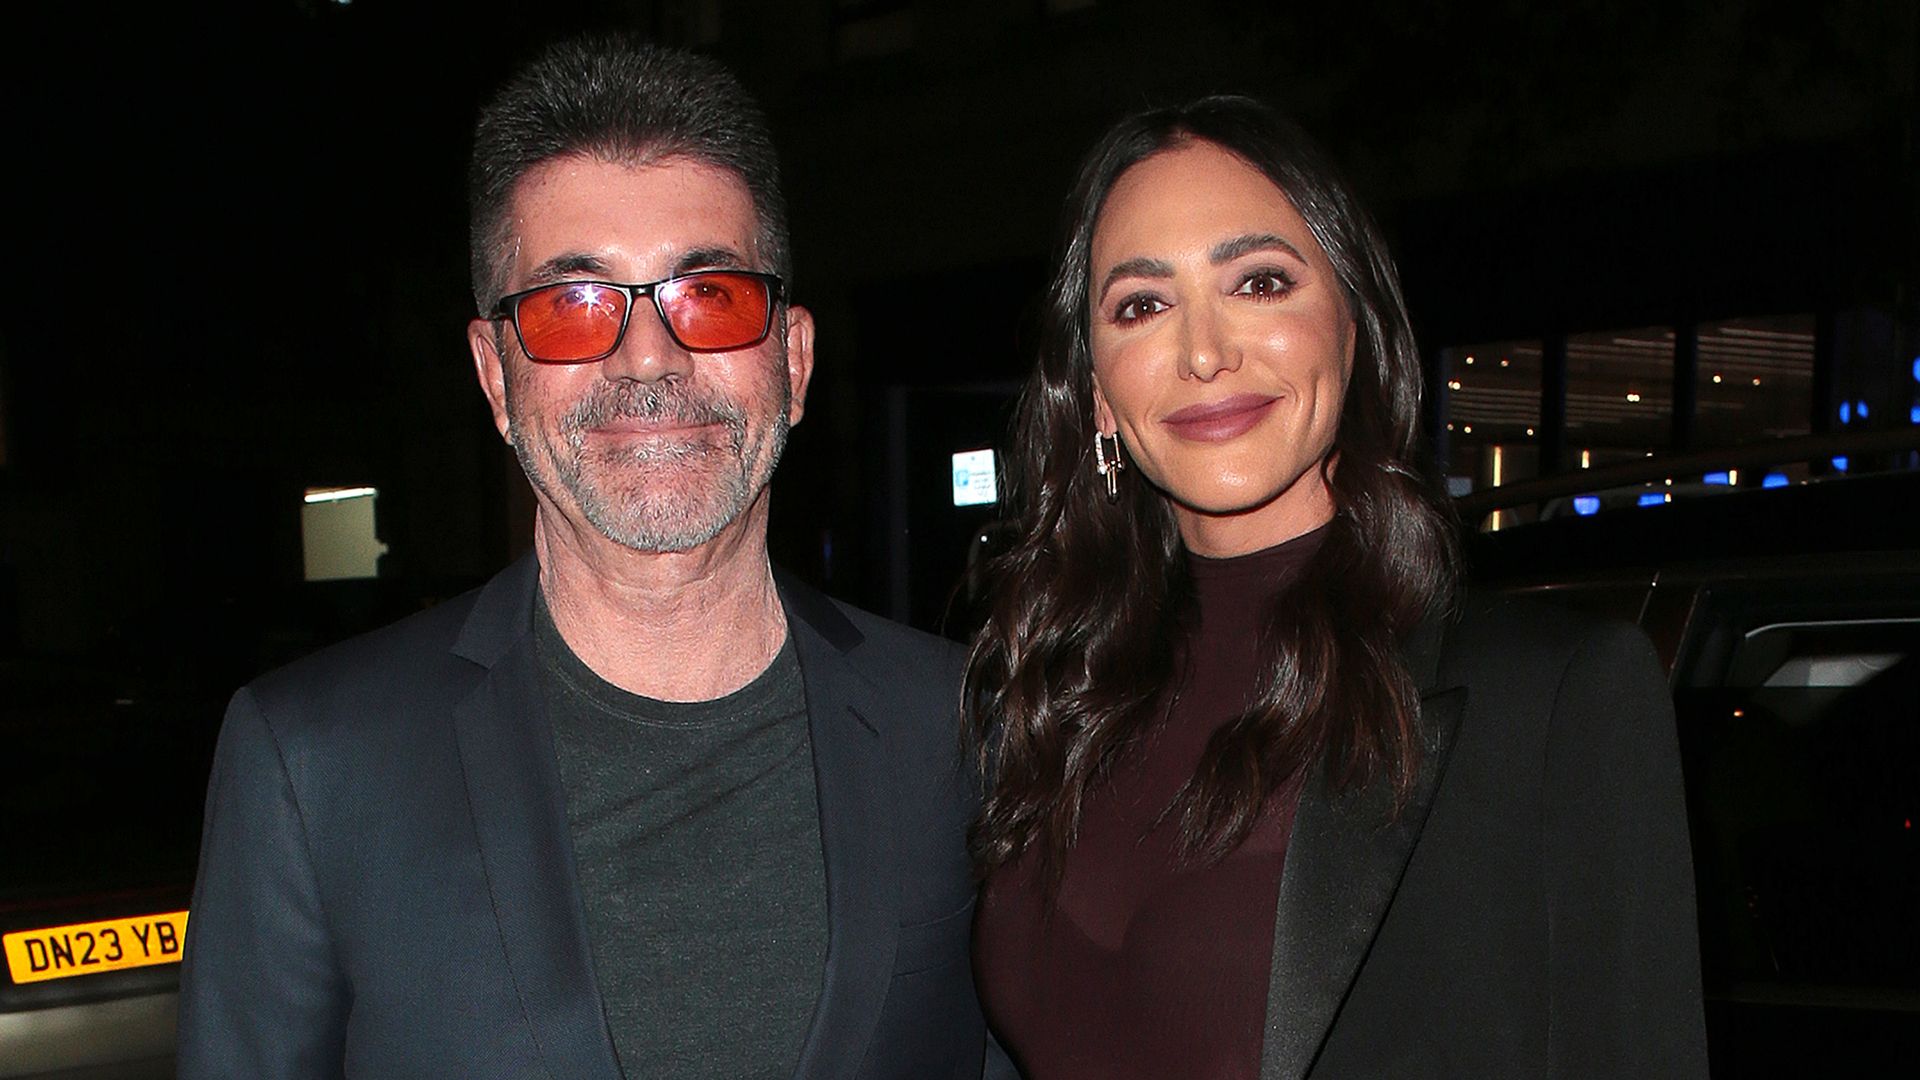 Simon Cowell and Lauren Silverman seen attending Griselda - VIP TV screening at The May Fair Hotel on January 10, 2024 in London, England.